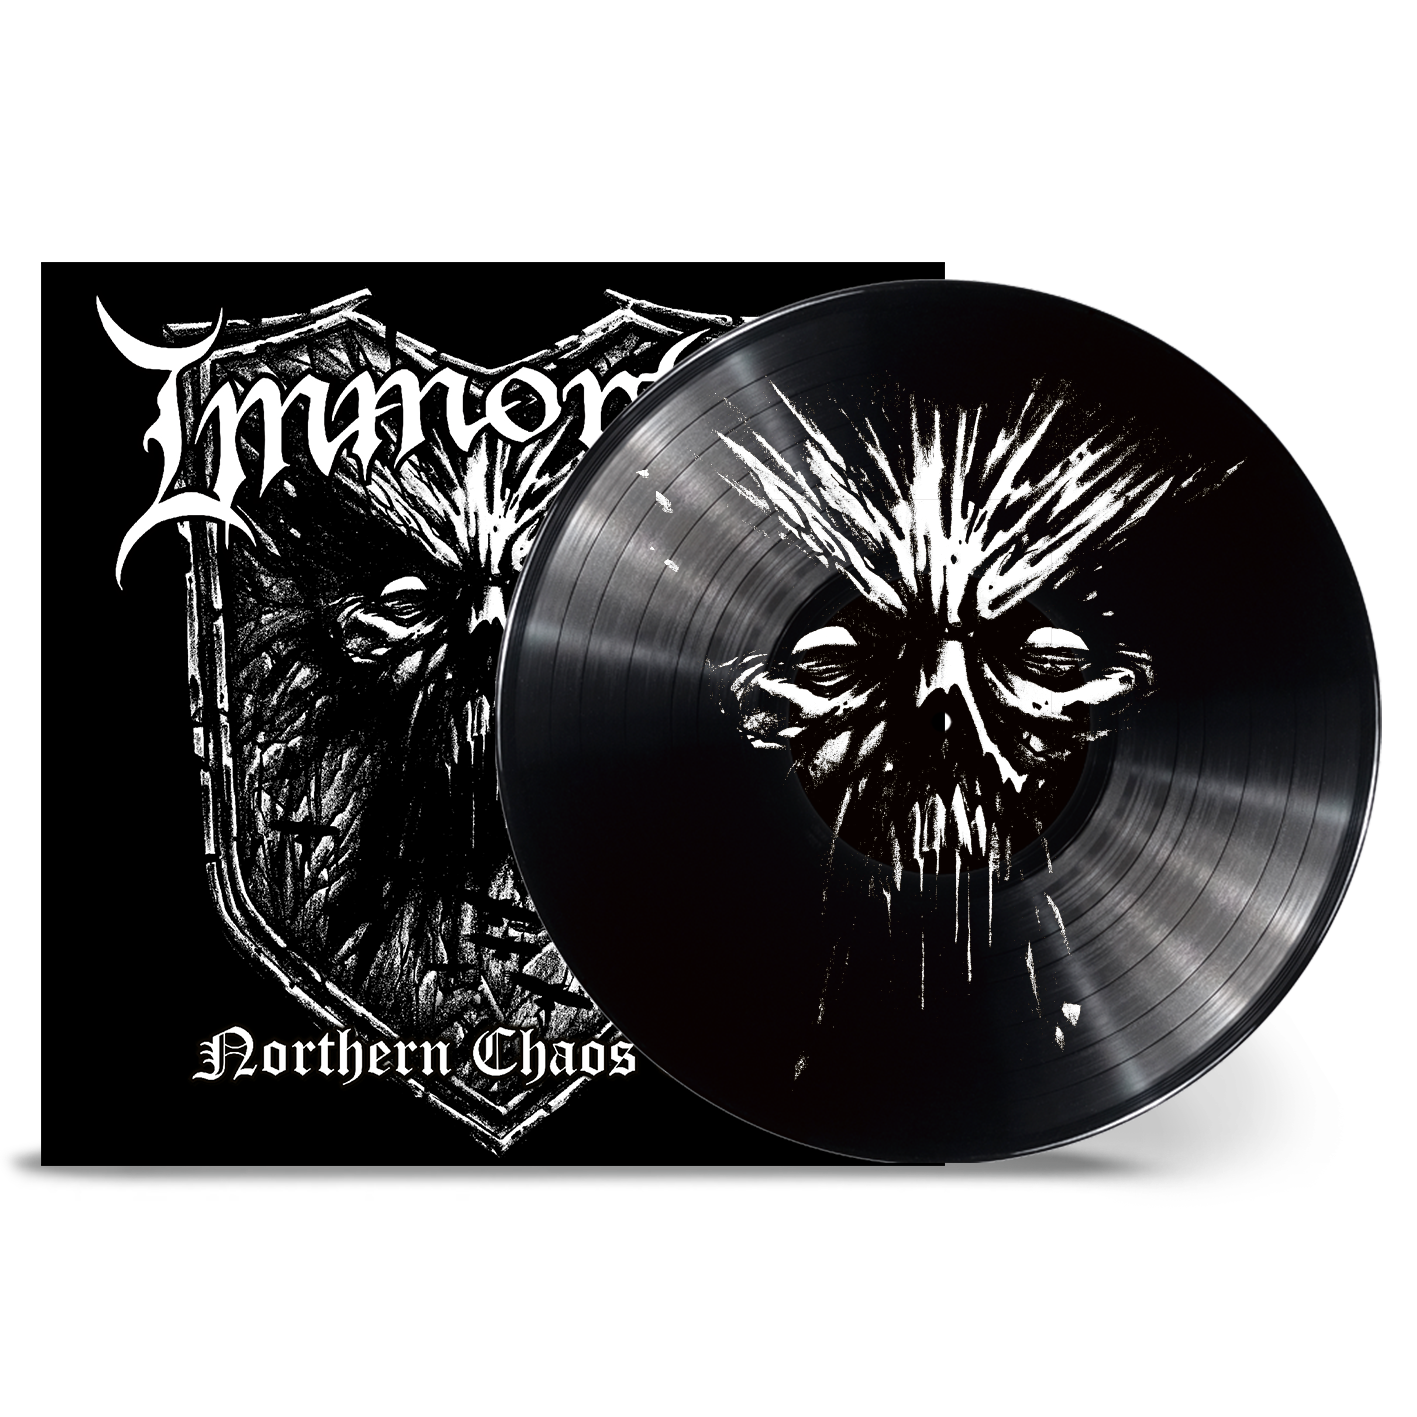 Immortal - Northern Chaos Gods: Limited Vinyl Picture Disc LP